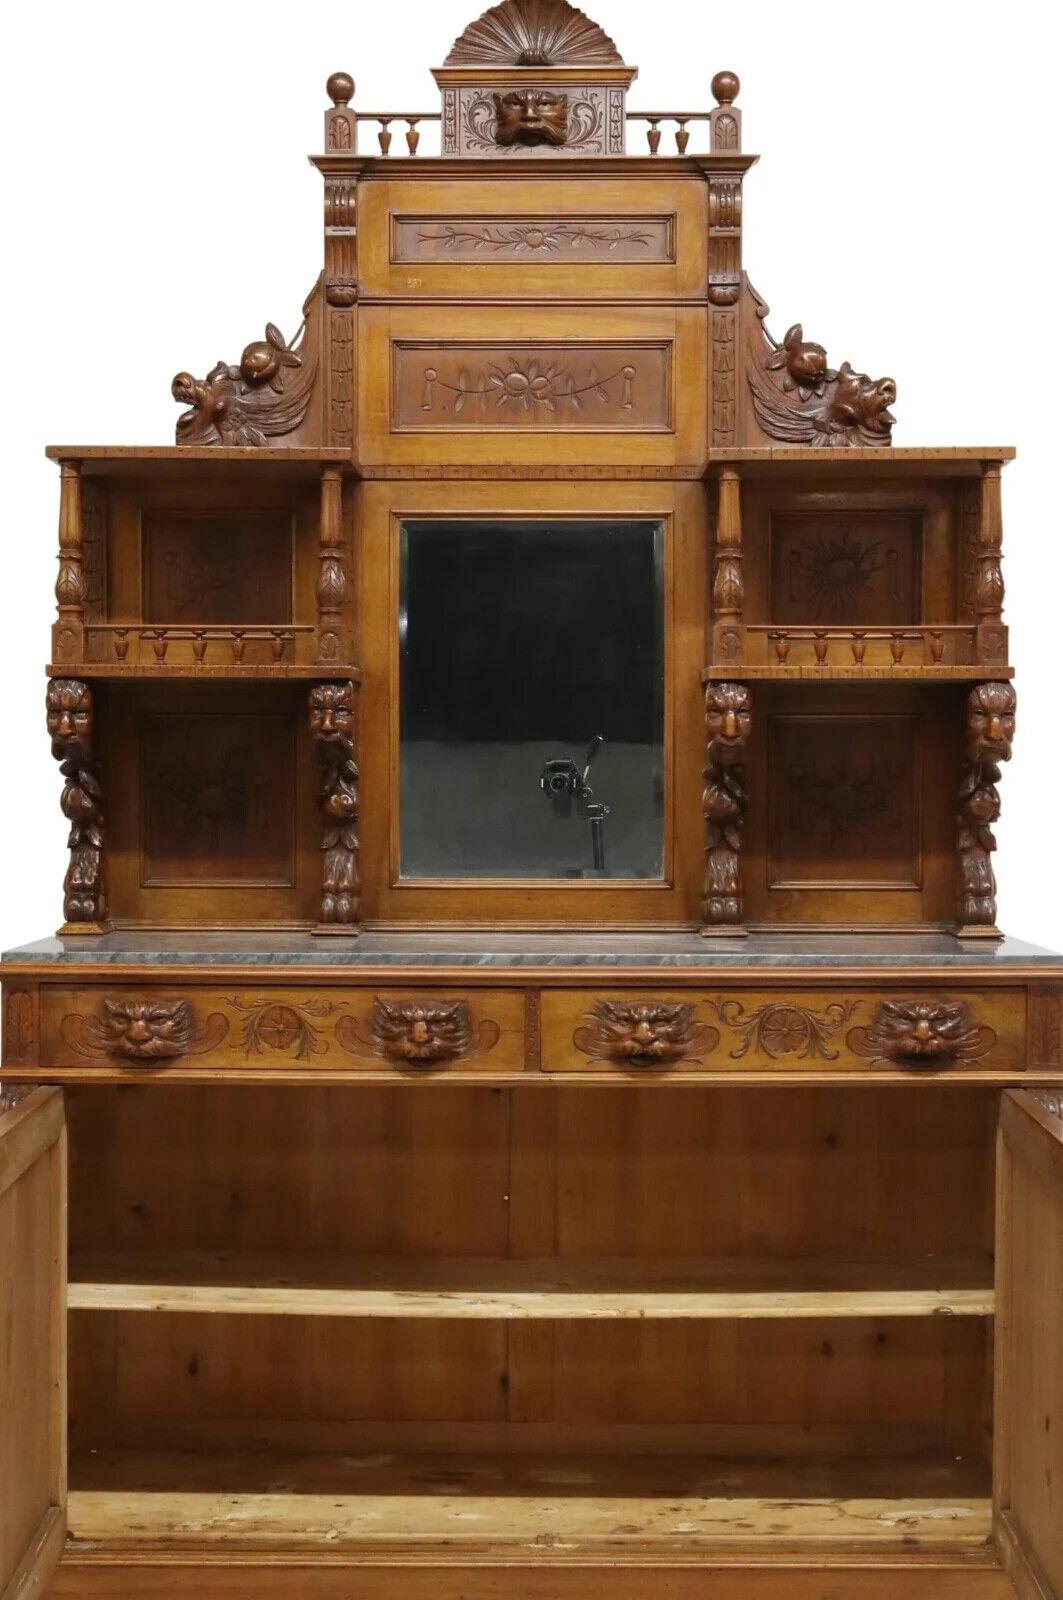 19th Century 1800's Antique Italian Renaissance Revival Carved, Mirror, Crest, Sideboard!! For Sale